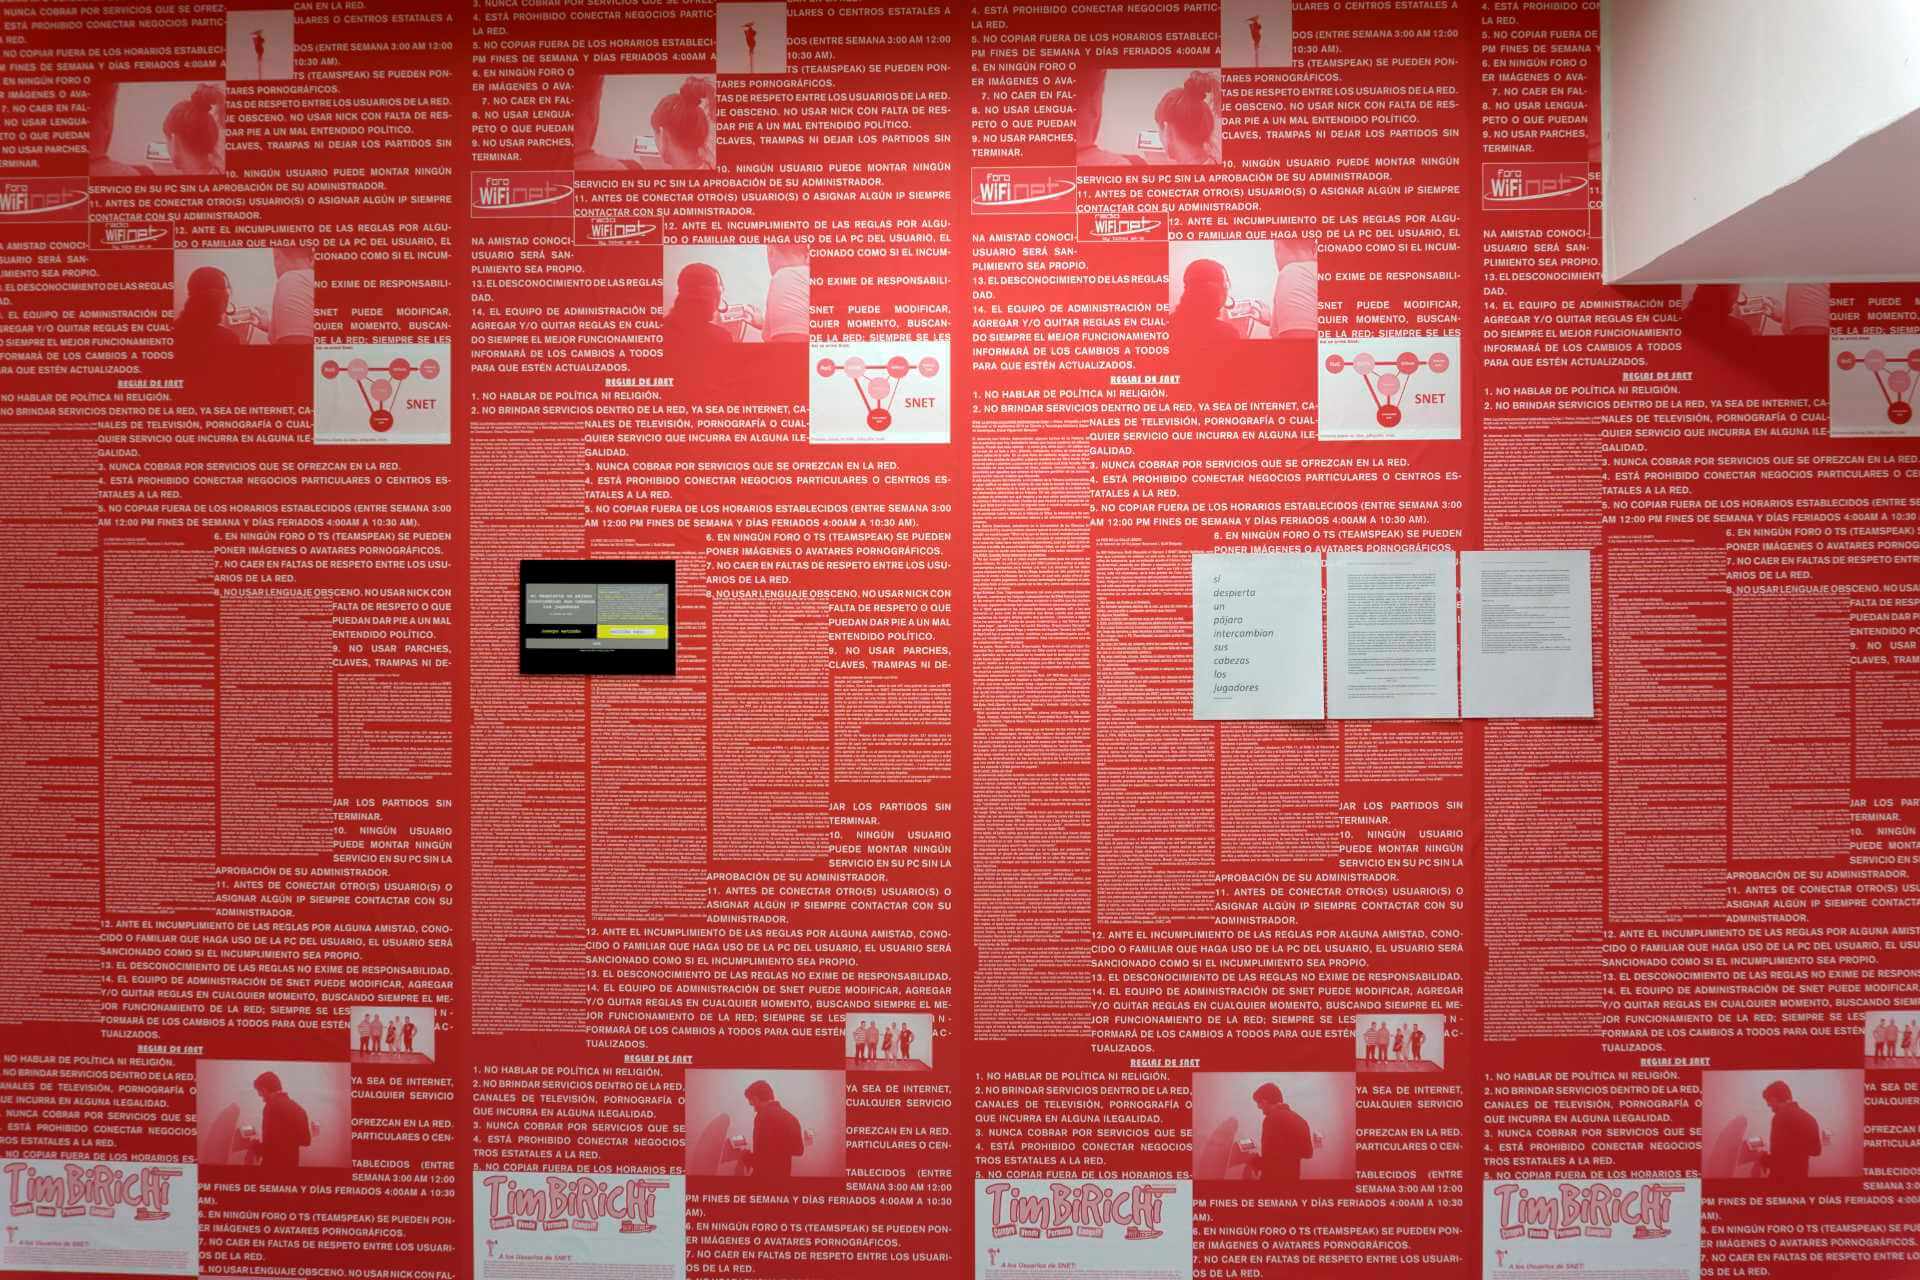 A wall with red paper wall with messages of a poem by Ernesto Oroza for SNET called Si despierta un pájaro intercambian sus cabezas los jugadores